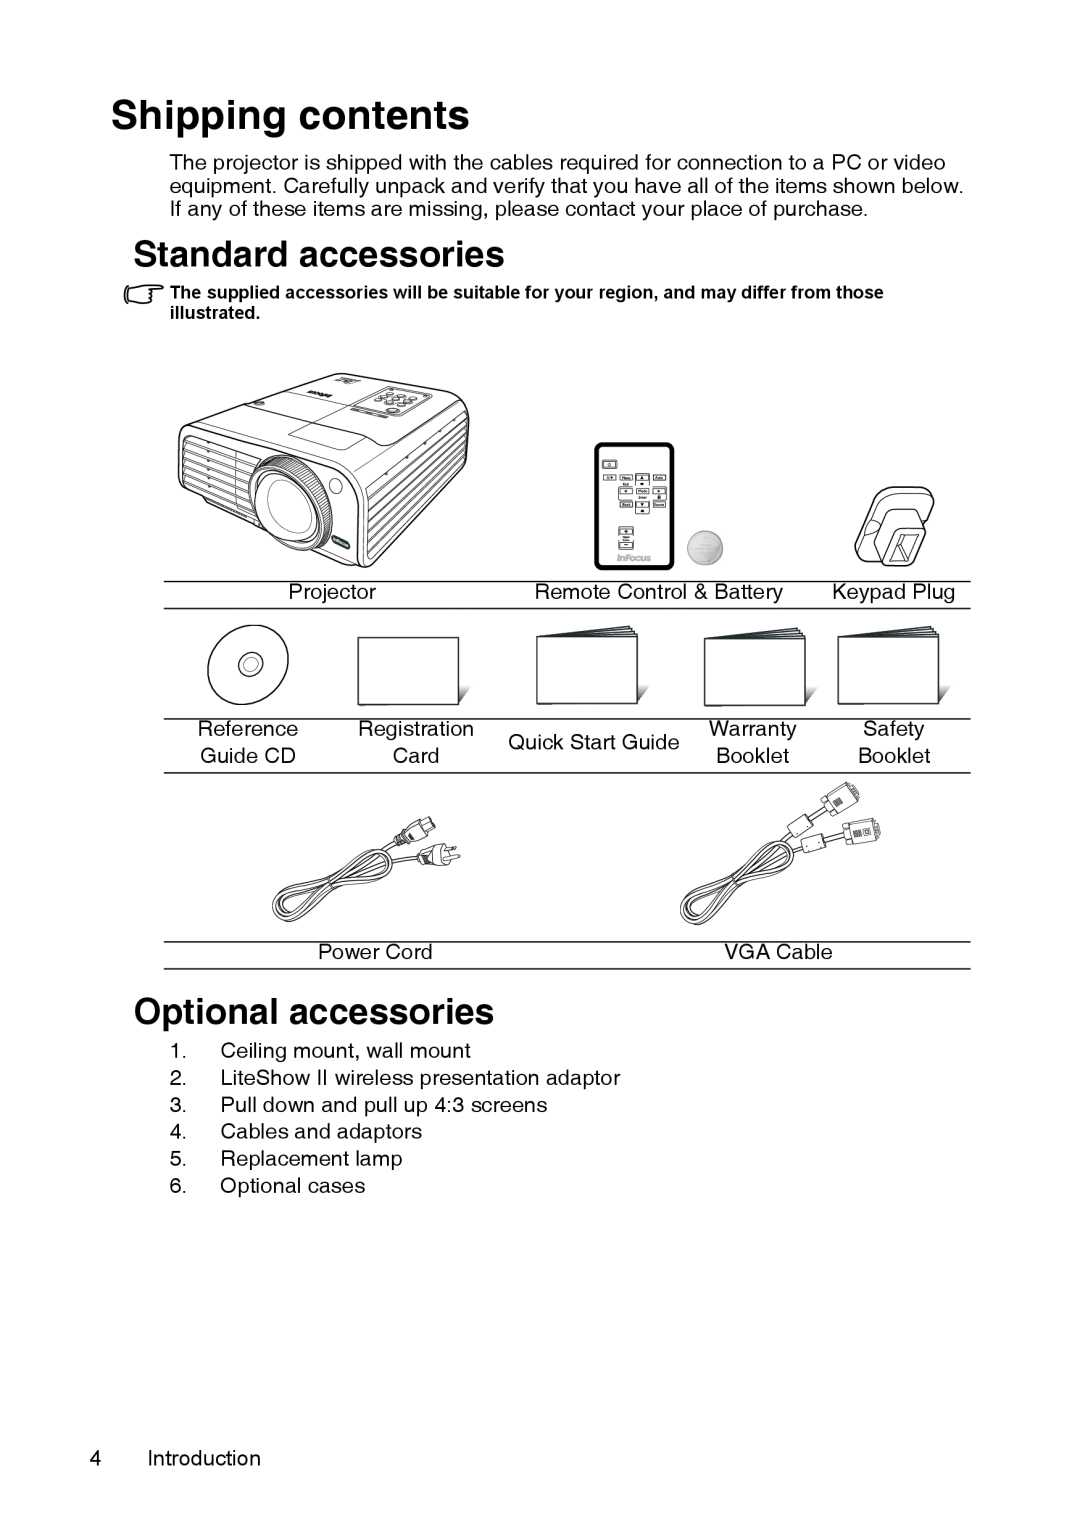 InFocus XS1 manual Shipping contents, Standard accessories, Optional accessories 